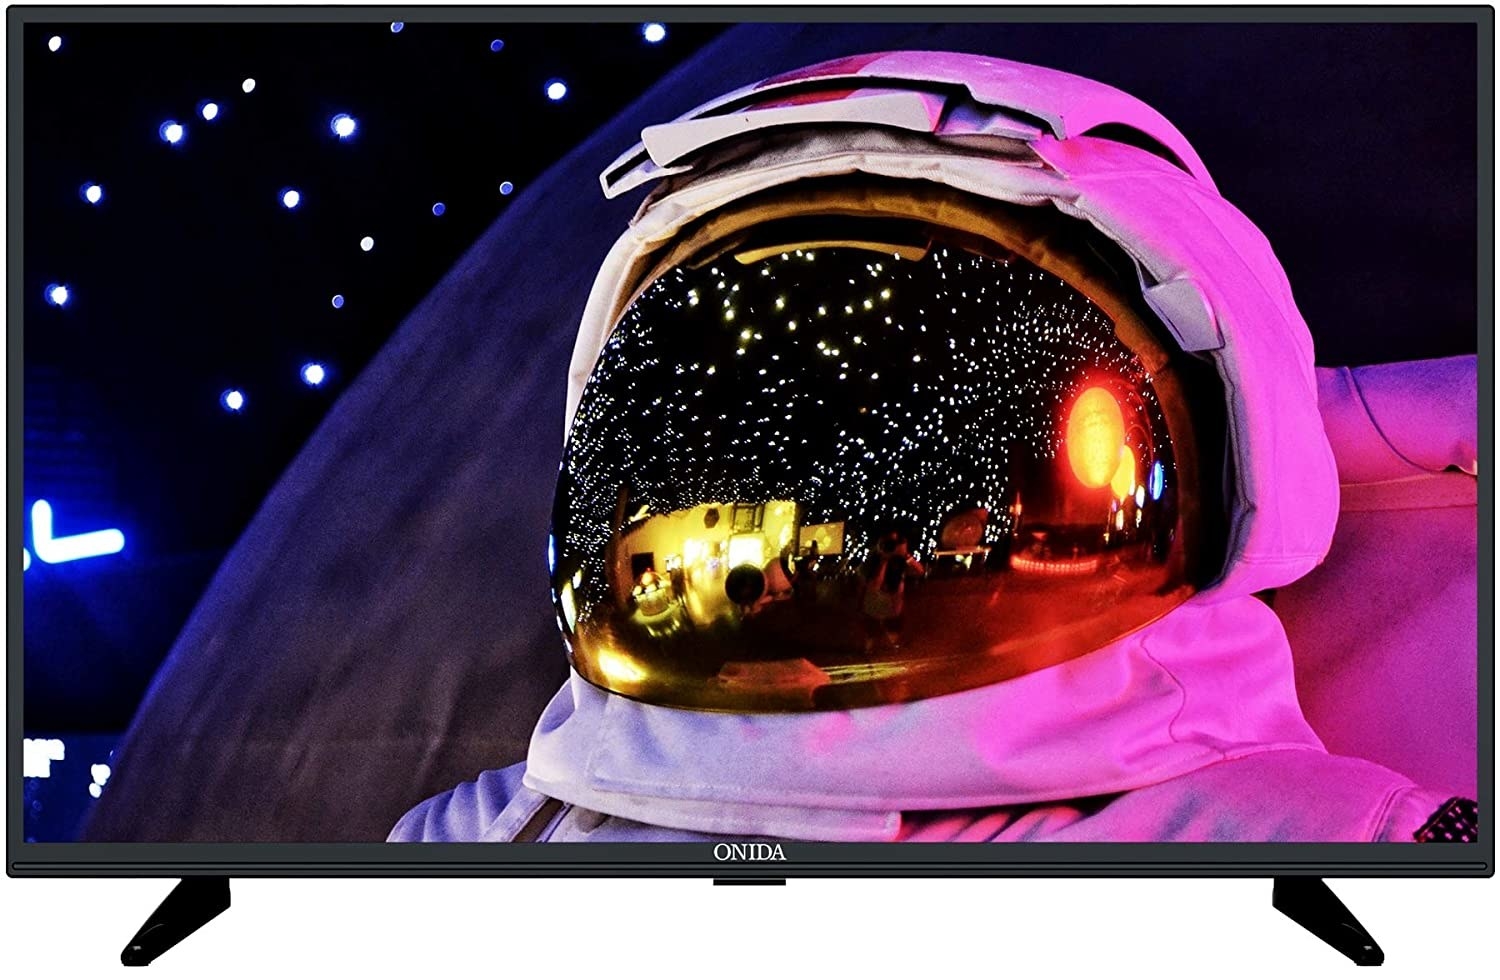 A TV screen with an astronaut on it